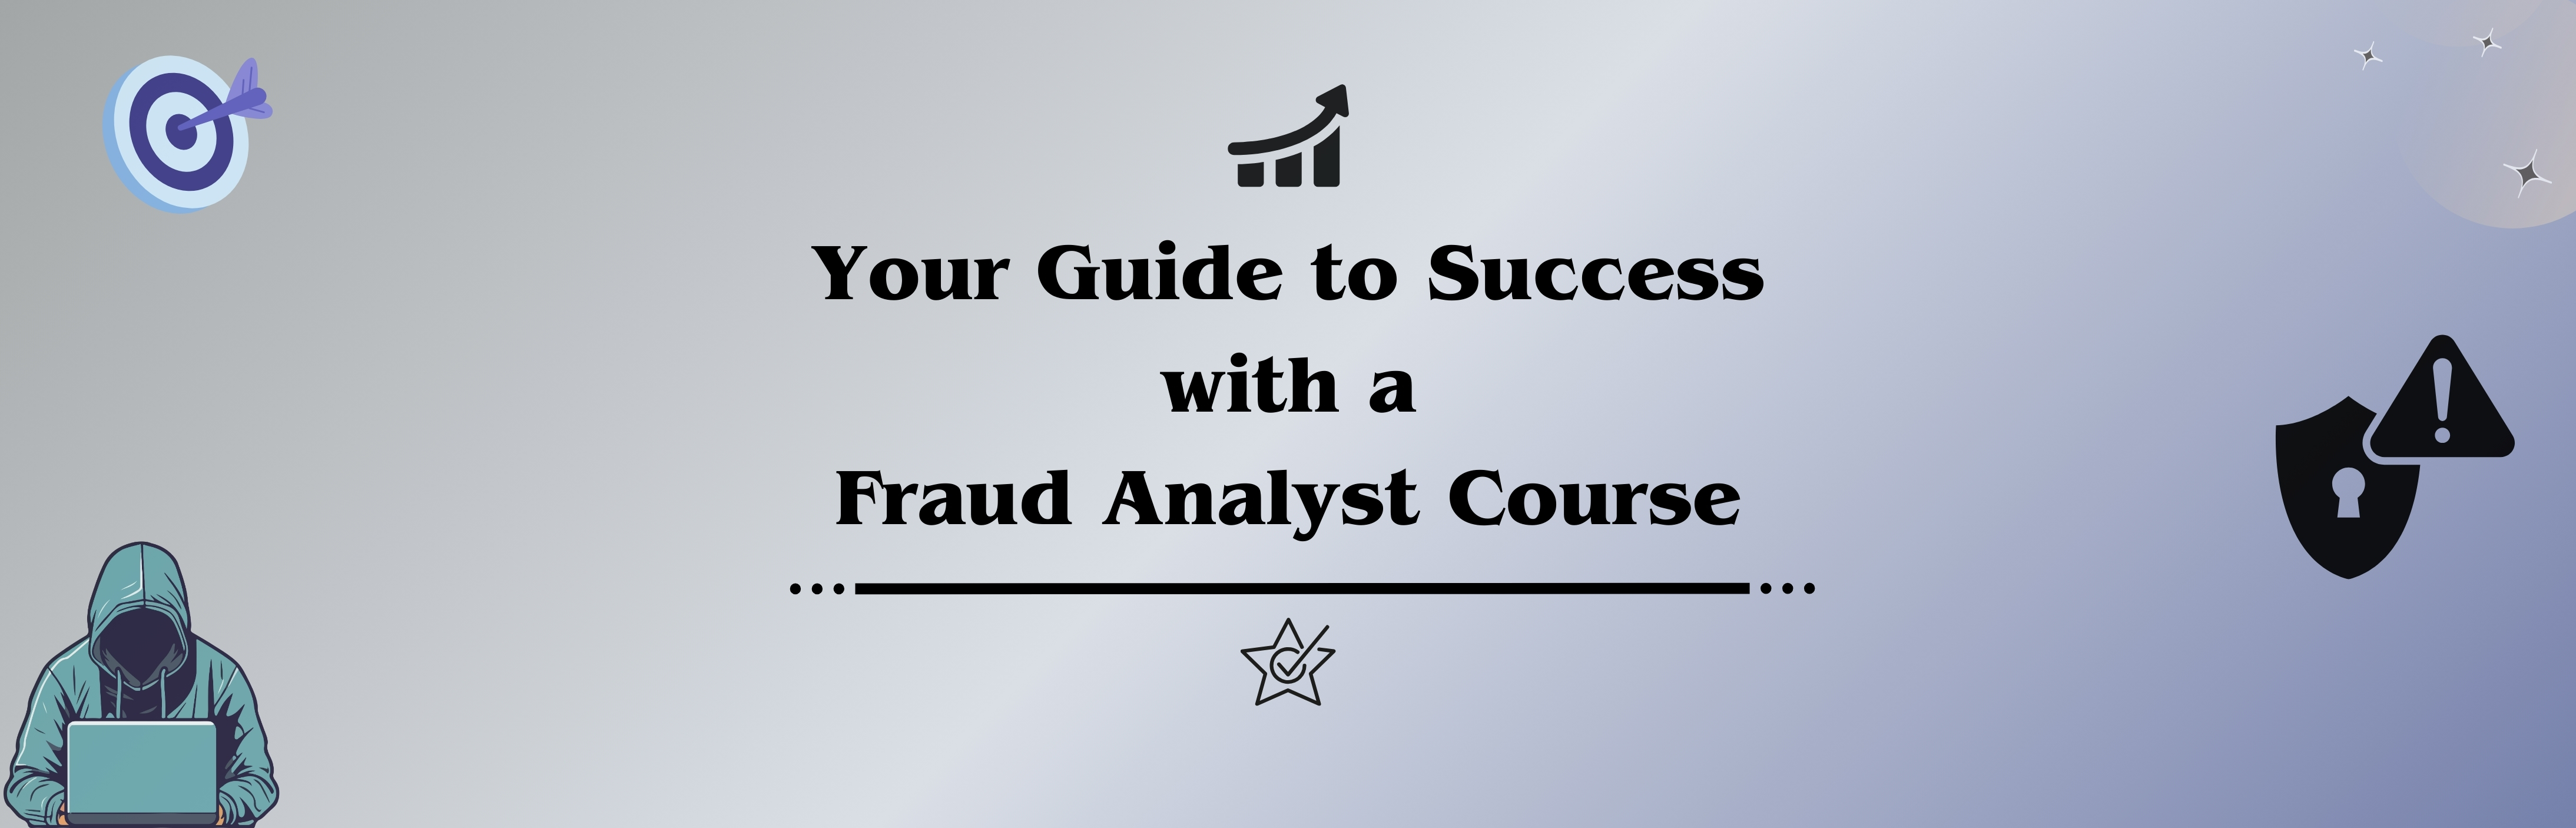 Your Guide to Success with a Fraud Analyst Course